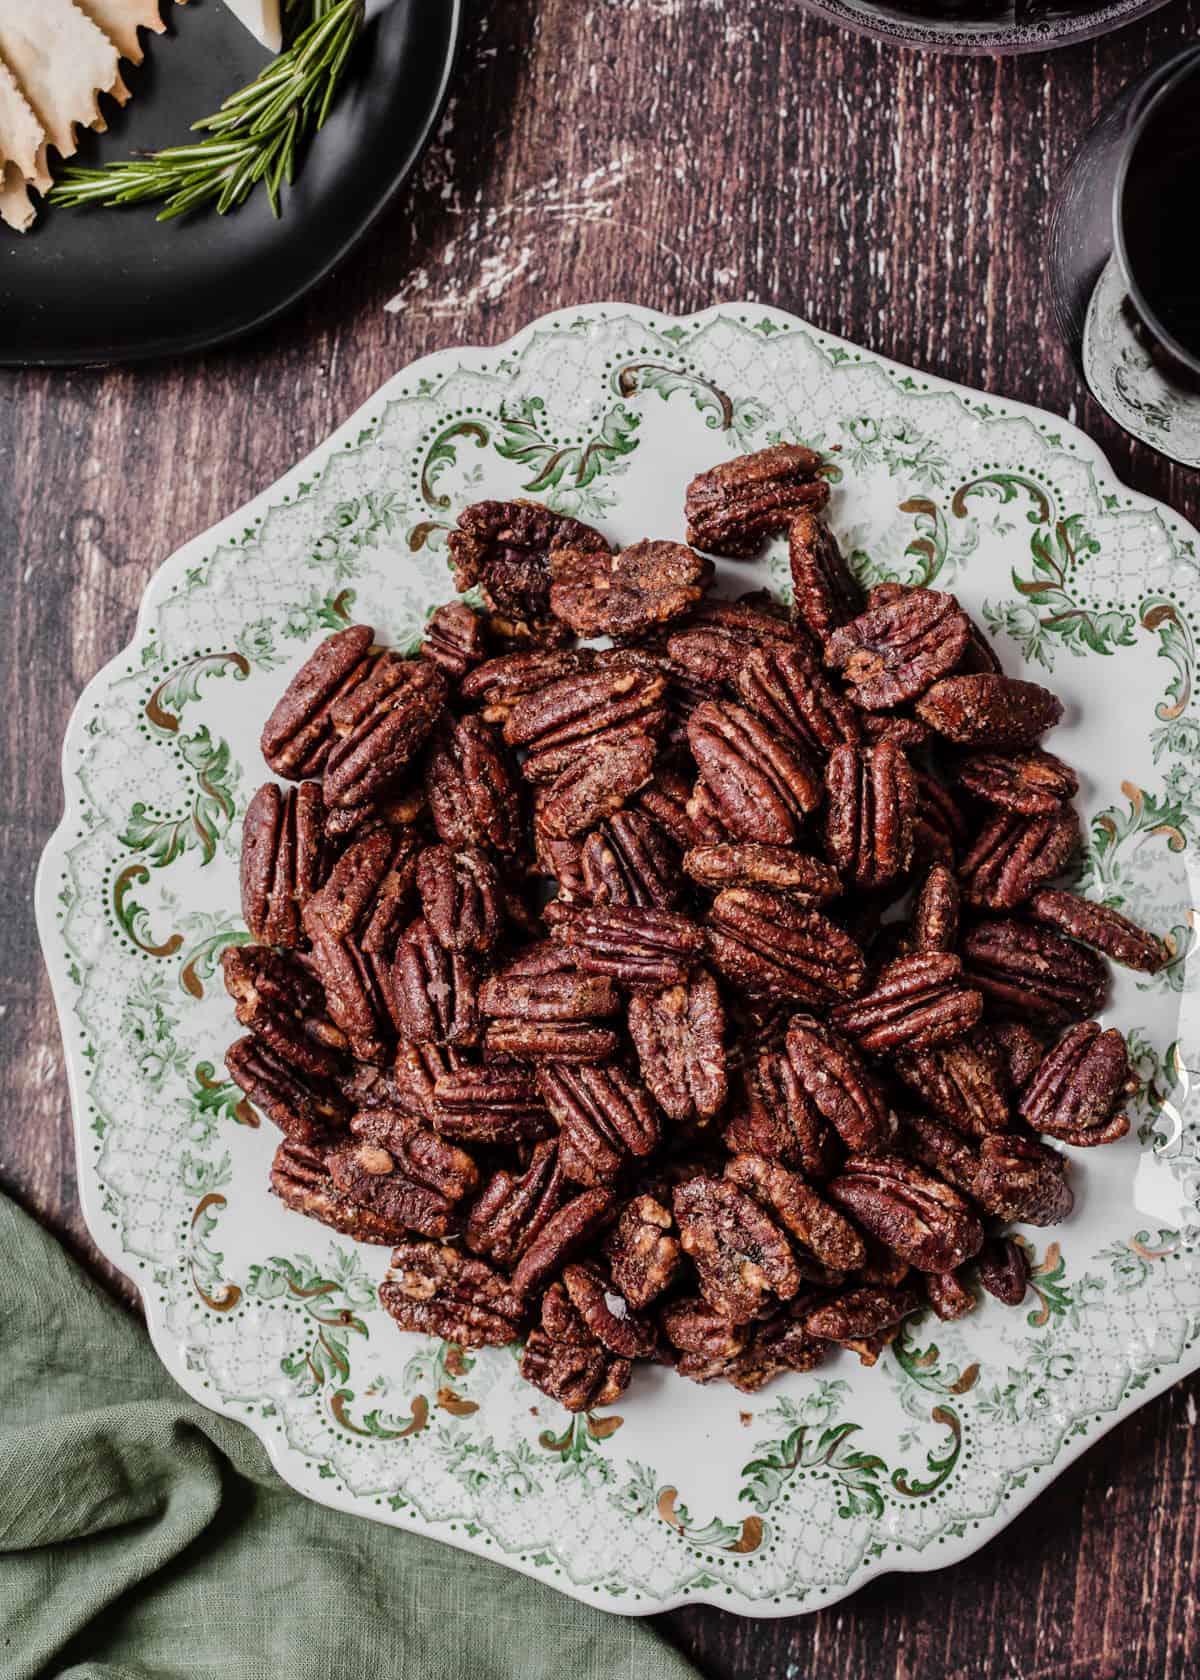 seasoned pecans served on vintage green and white plate on dark wood surface.